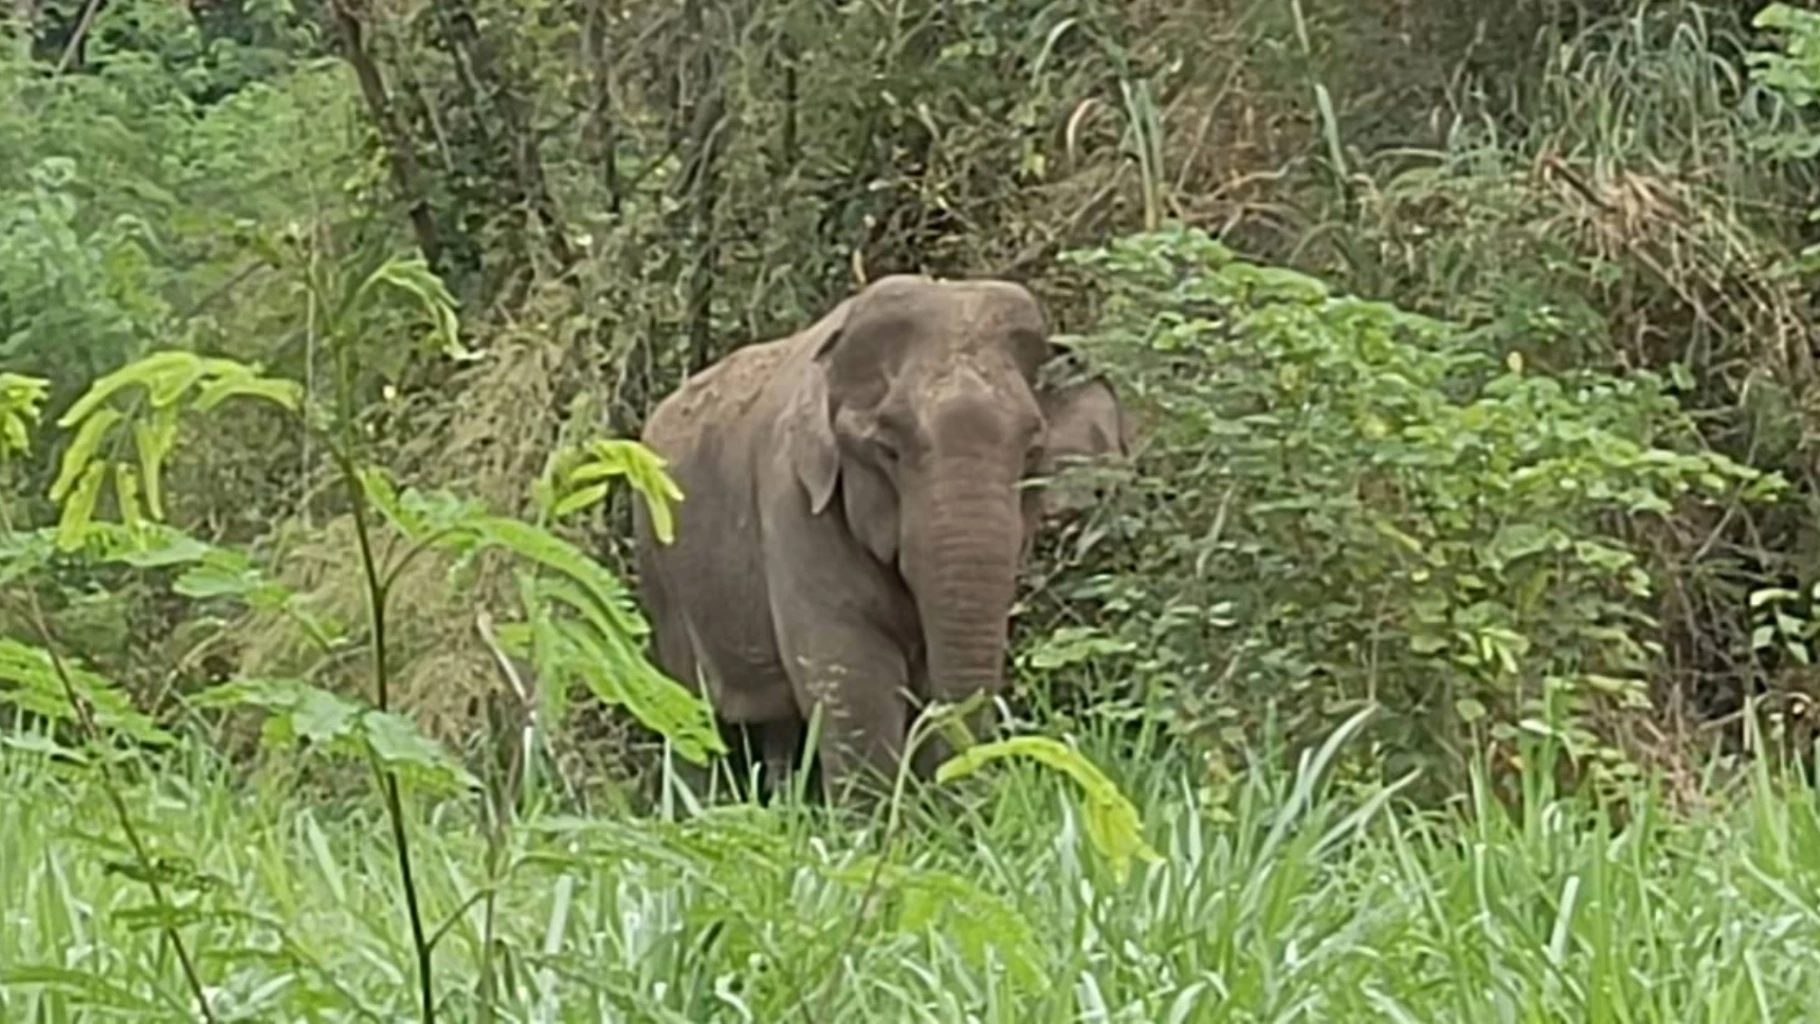 Arrest Warrant Issued for 25 Year-Old Wild Asian Elephant